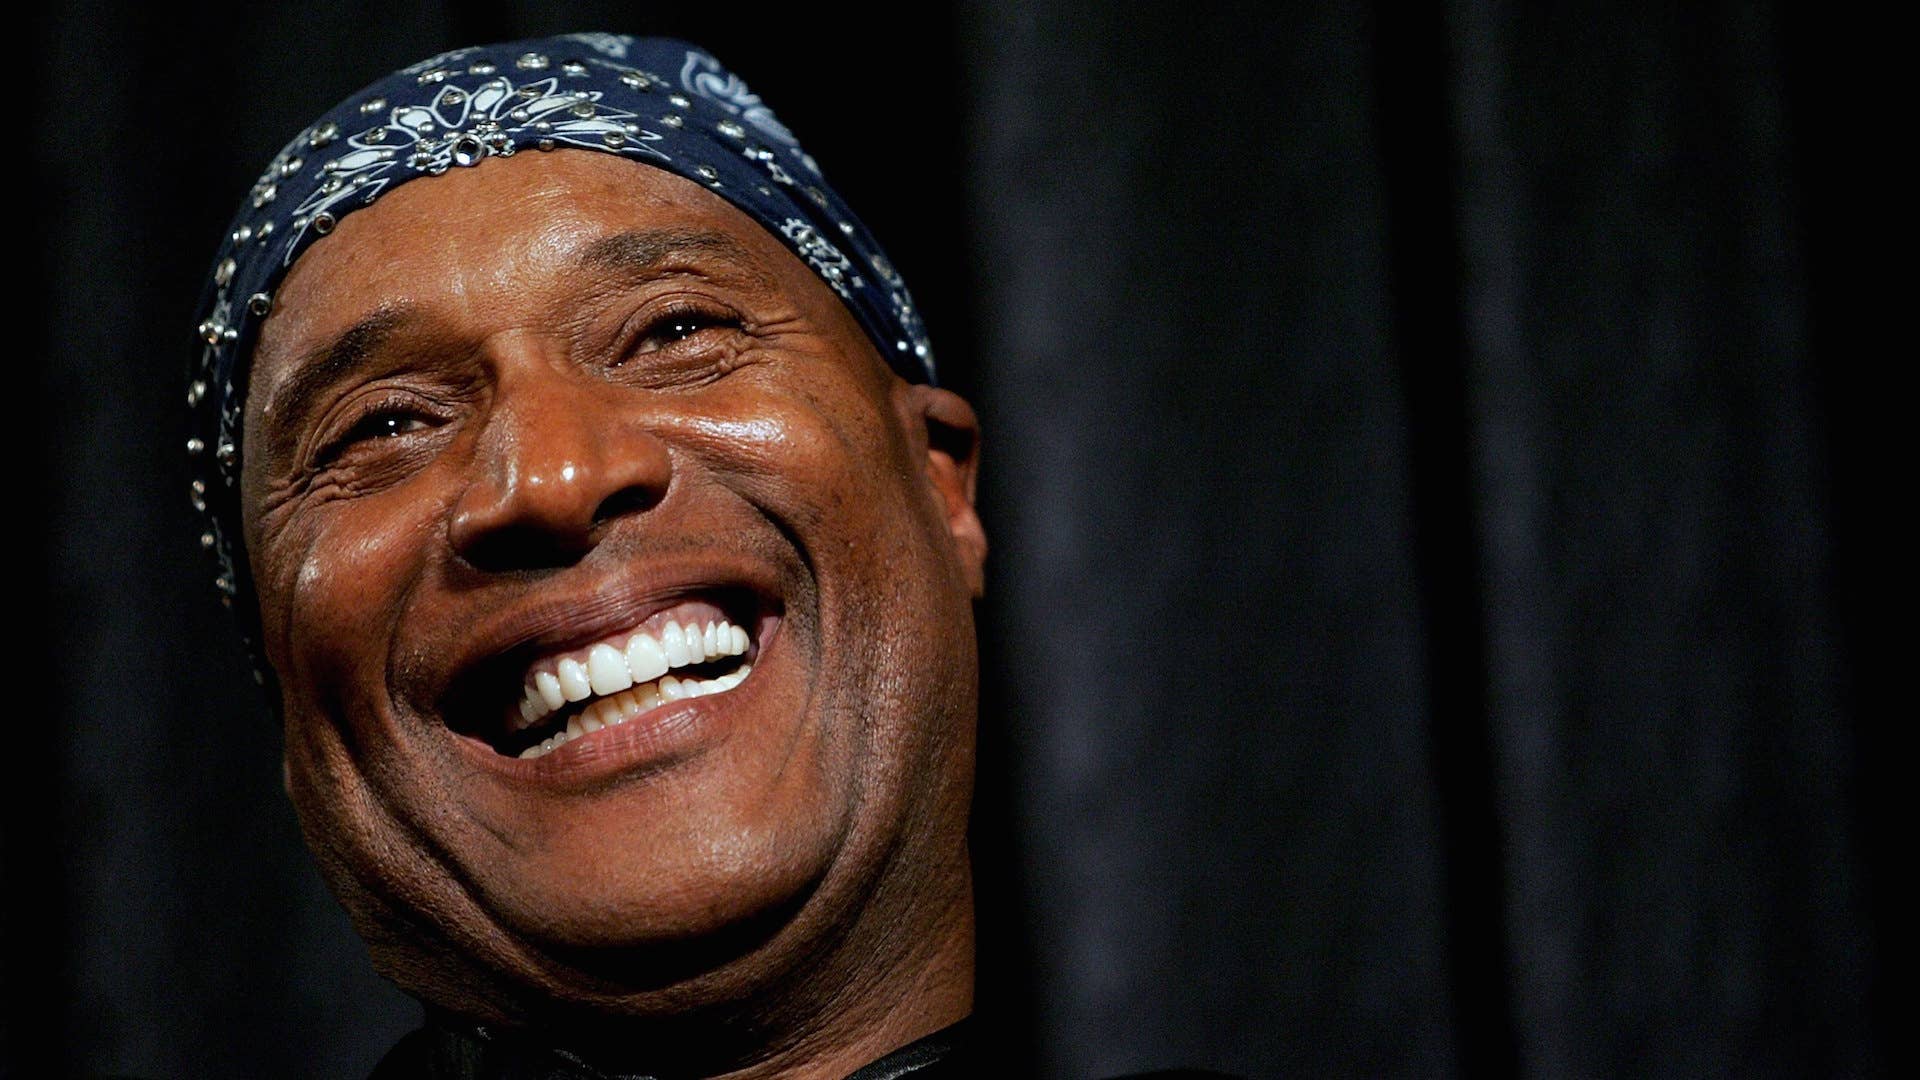 Comedian Paul Mooney takes part in a discussion panel